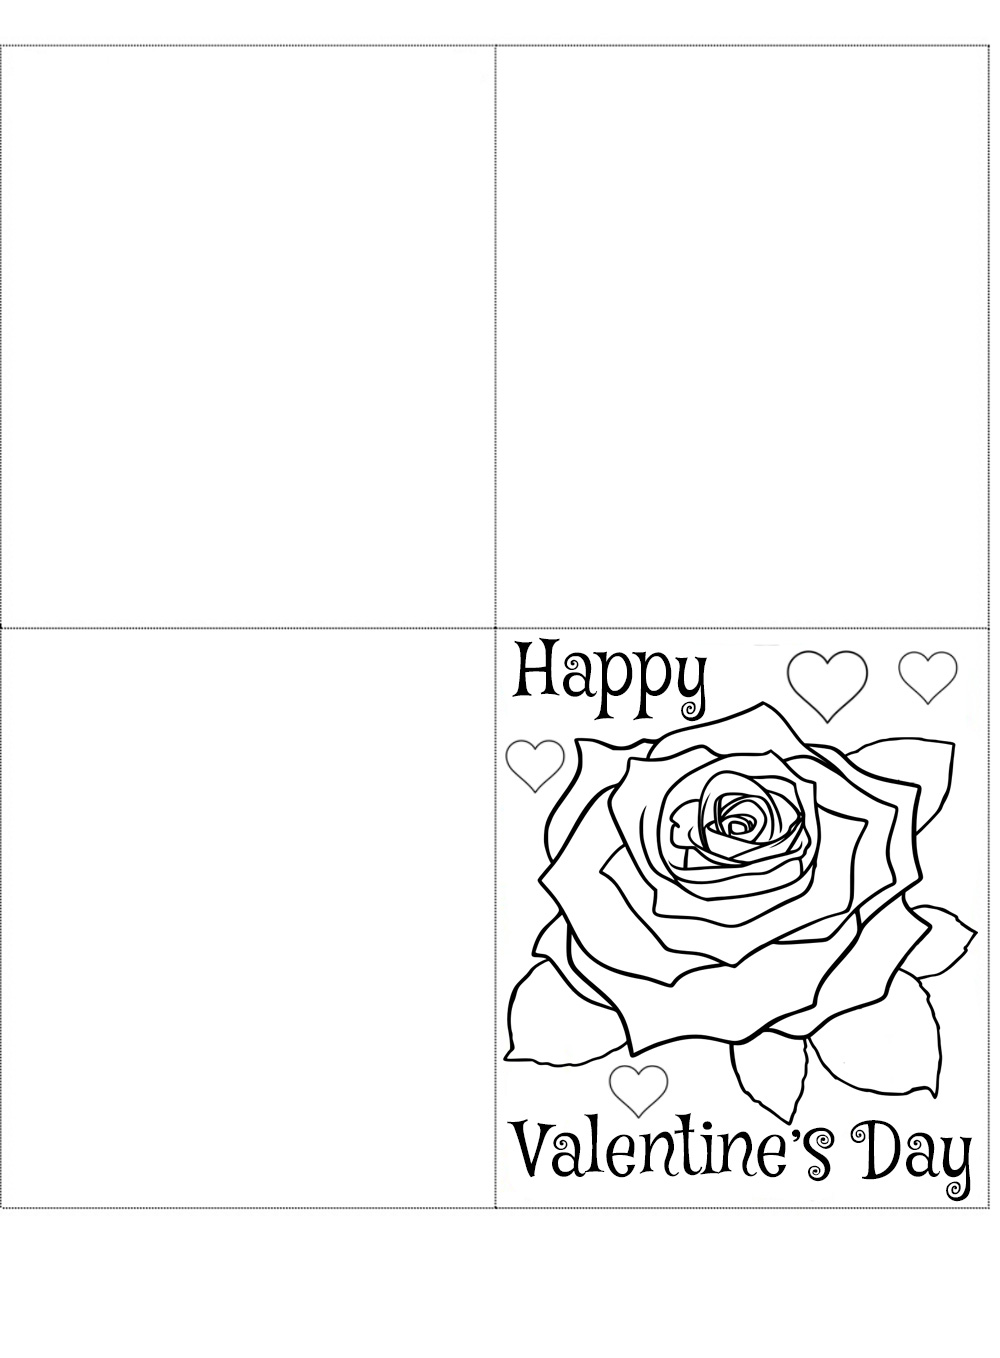 foldable-free-printable-printable-valentines-day-cards-to-color